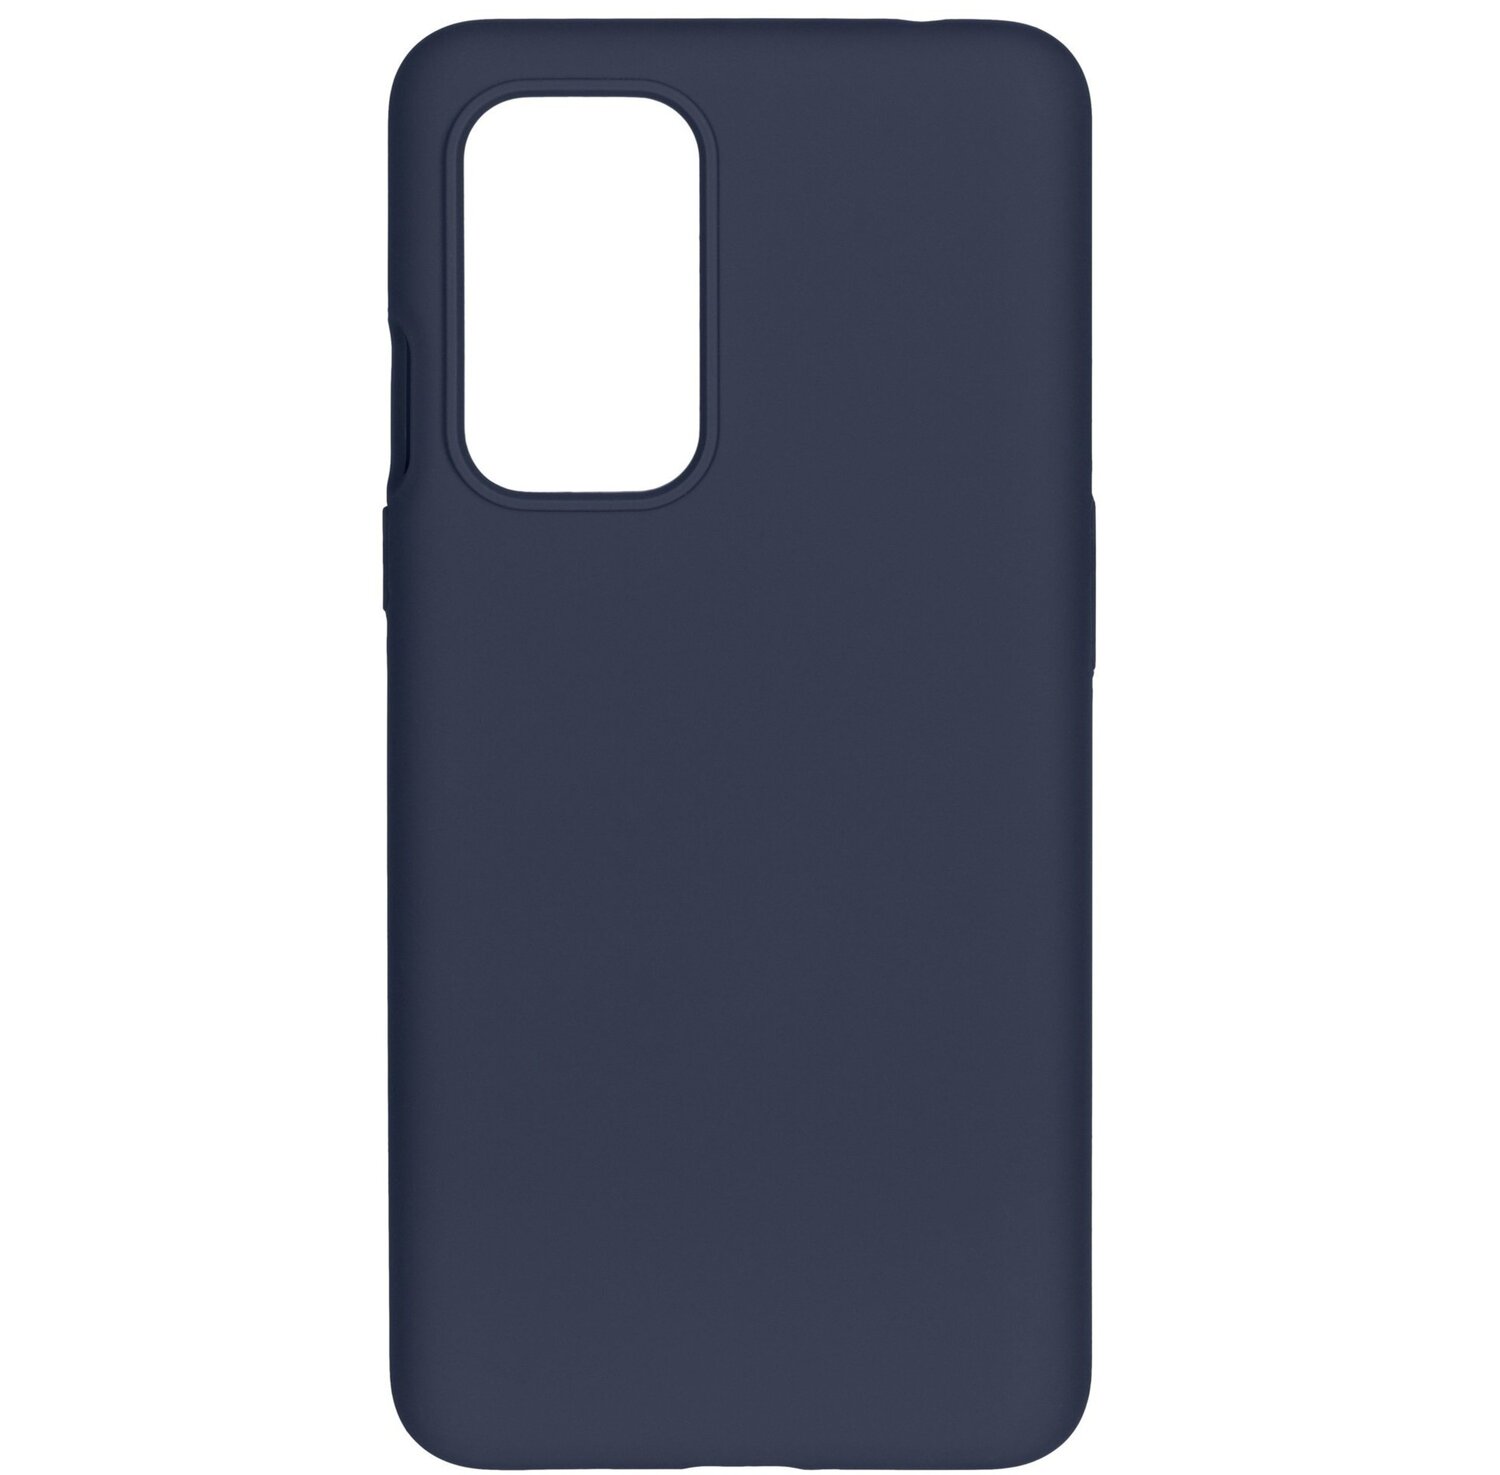 Чехол 2Е для OnePlus 9 LE2113 Solid Silicon Midnight Blue (2E-OP-9-OCLS-BL) фото 